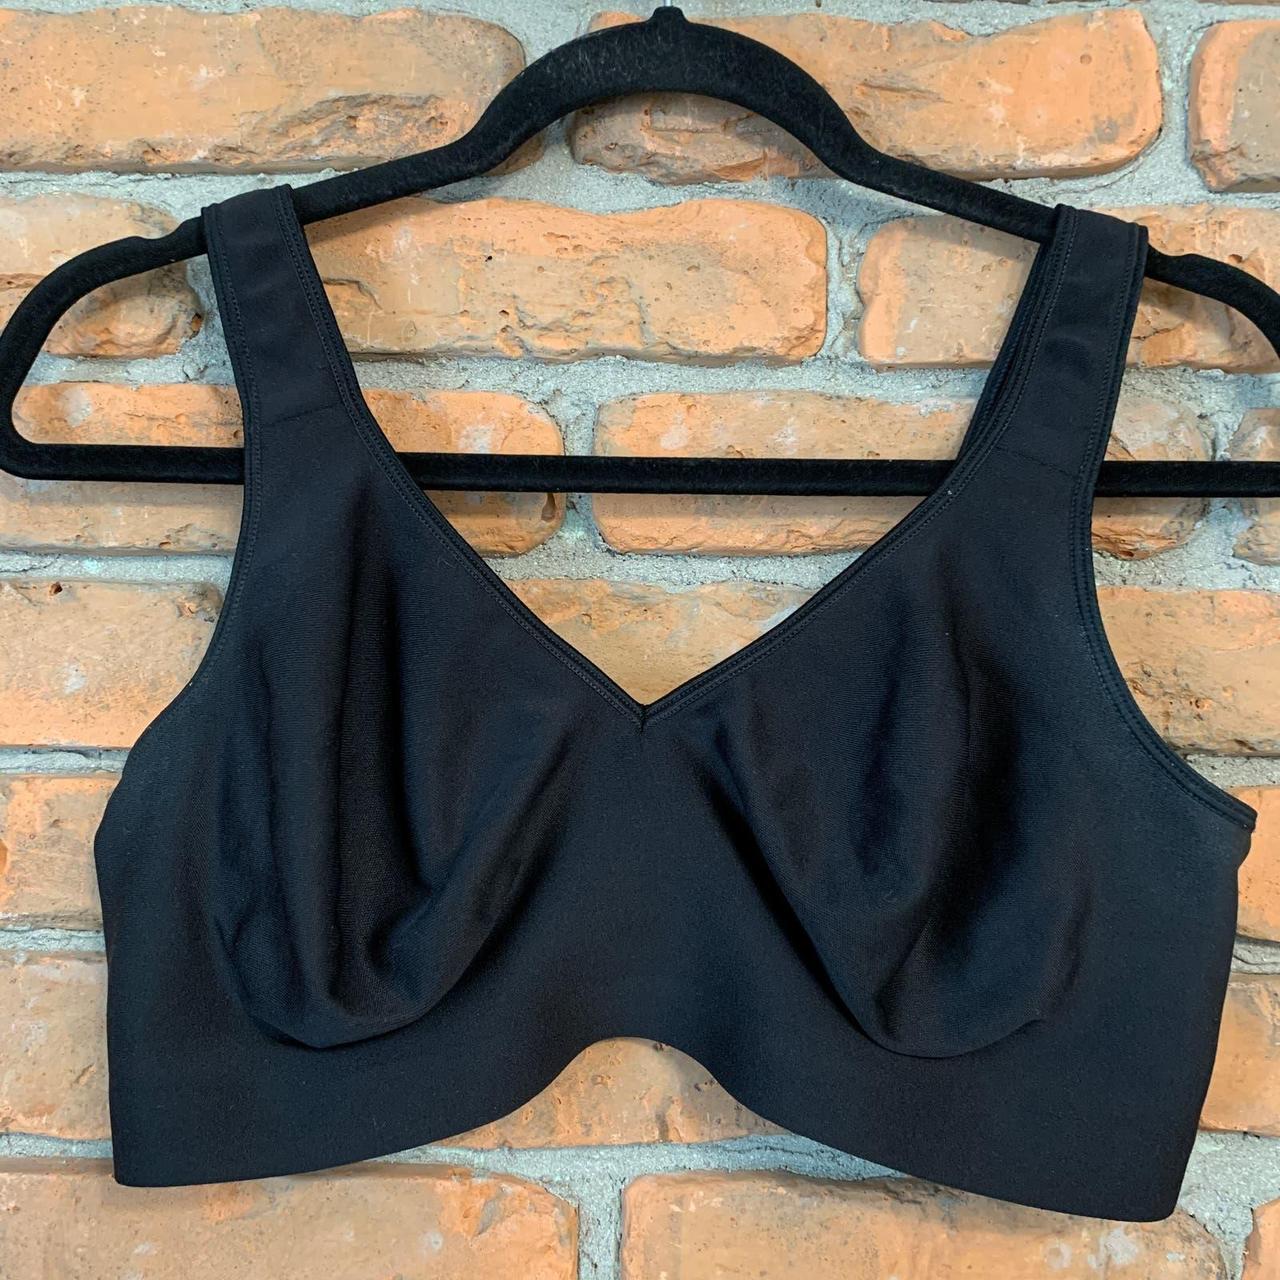 Hanes Smooth Comfort Wireless T-Shirt Bra with